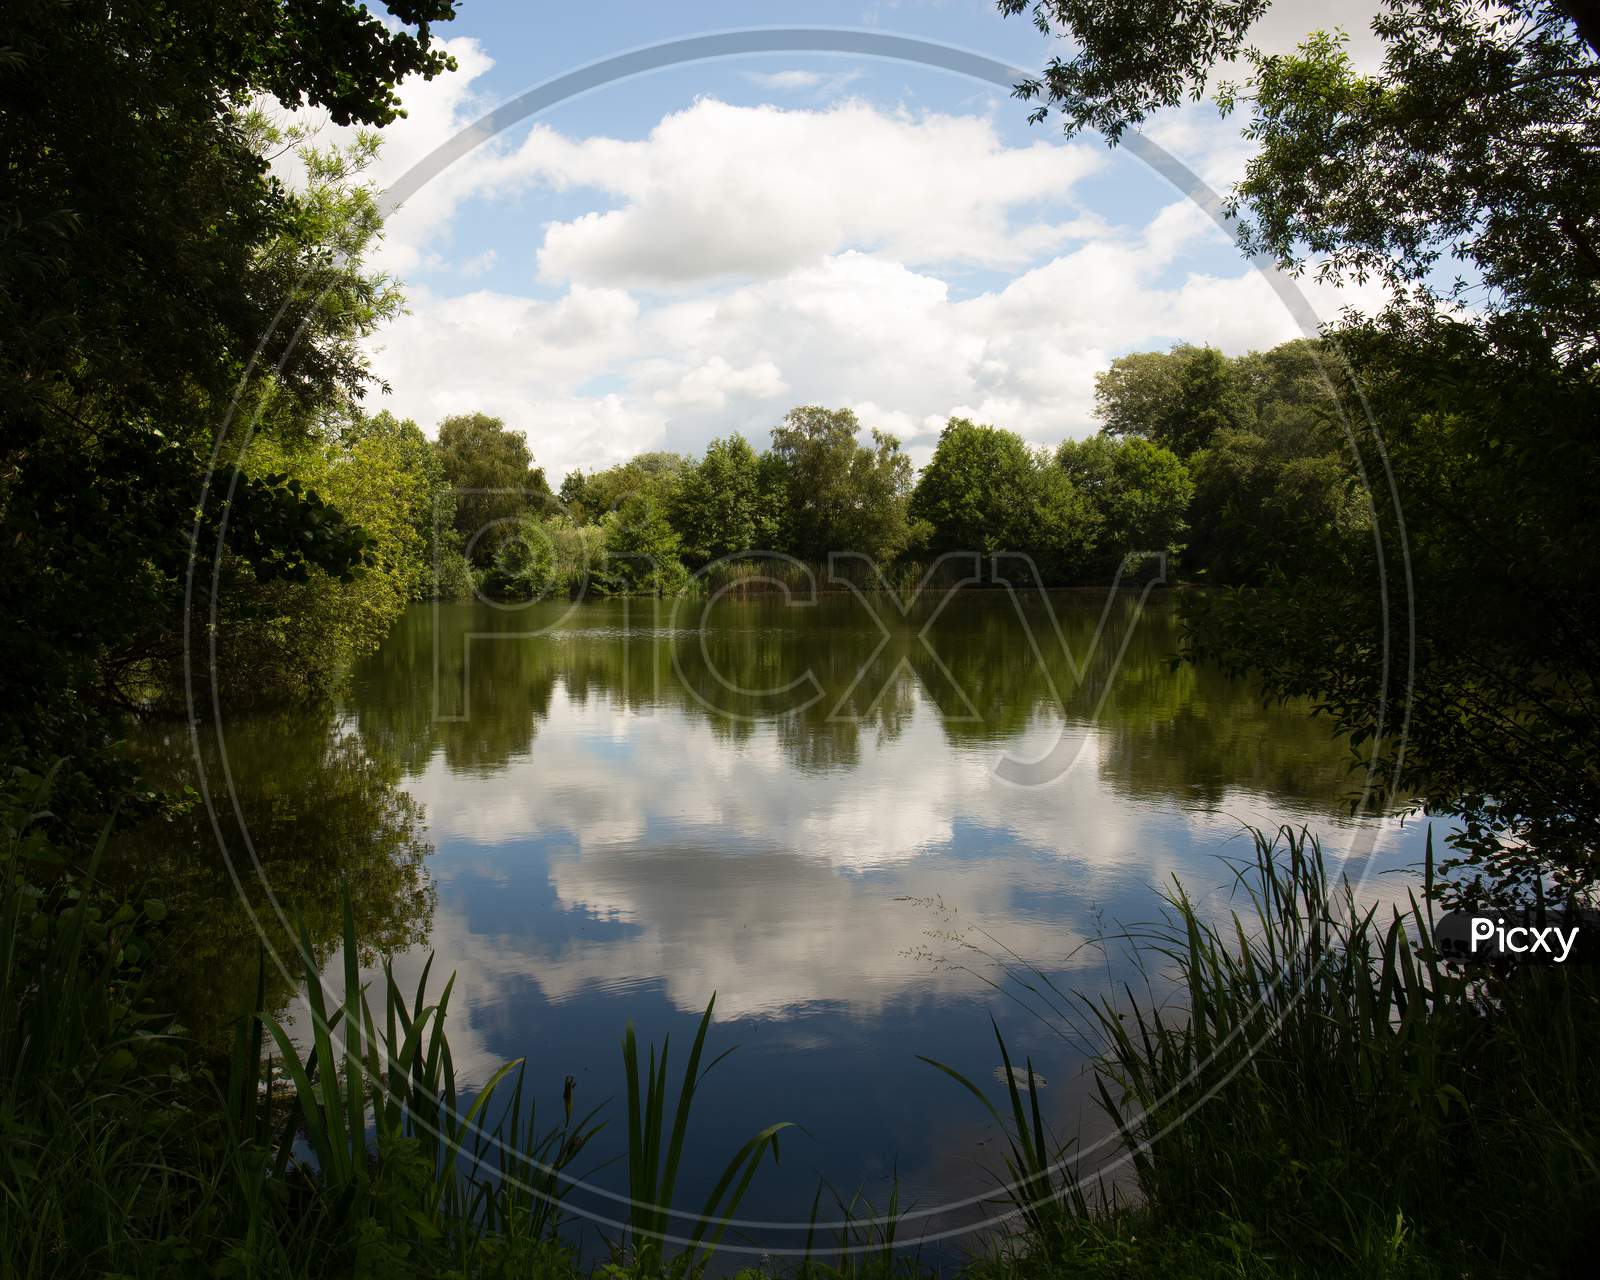 Lake Reflection Of Cloudy Blue Sky - Spring, Summers Season In England. Concept Of Tranquility And At One With Nature. Horizontal